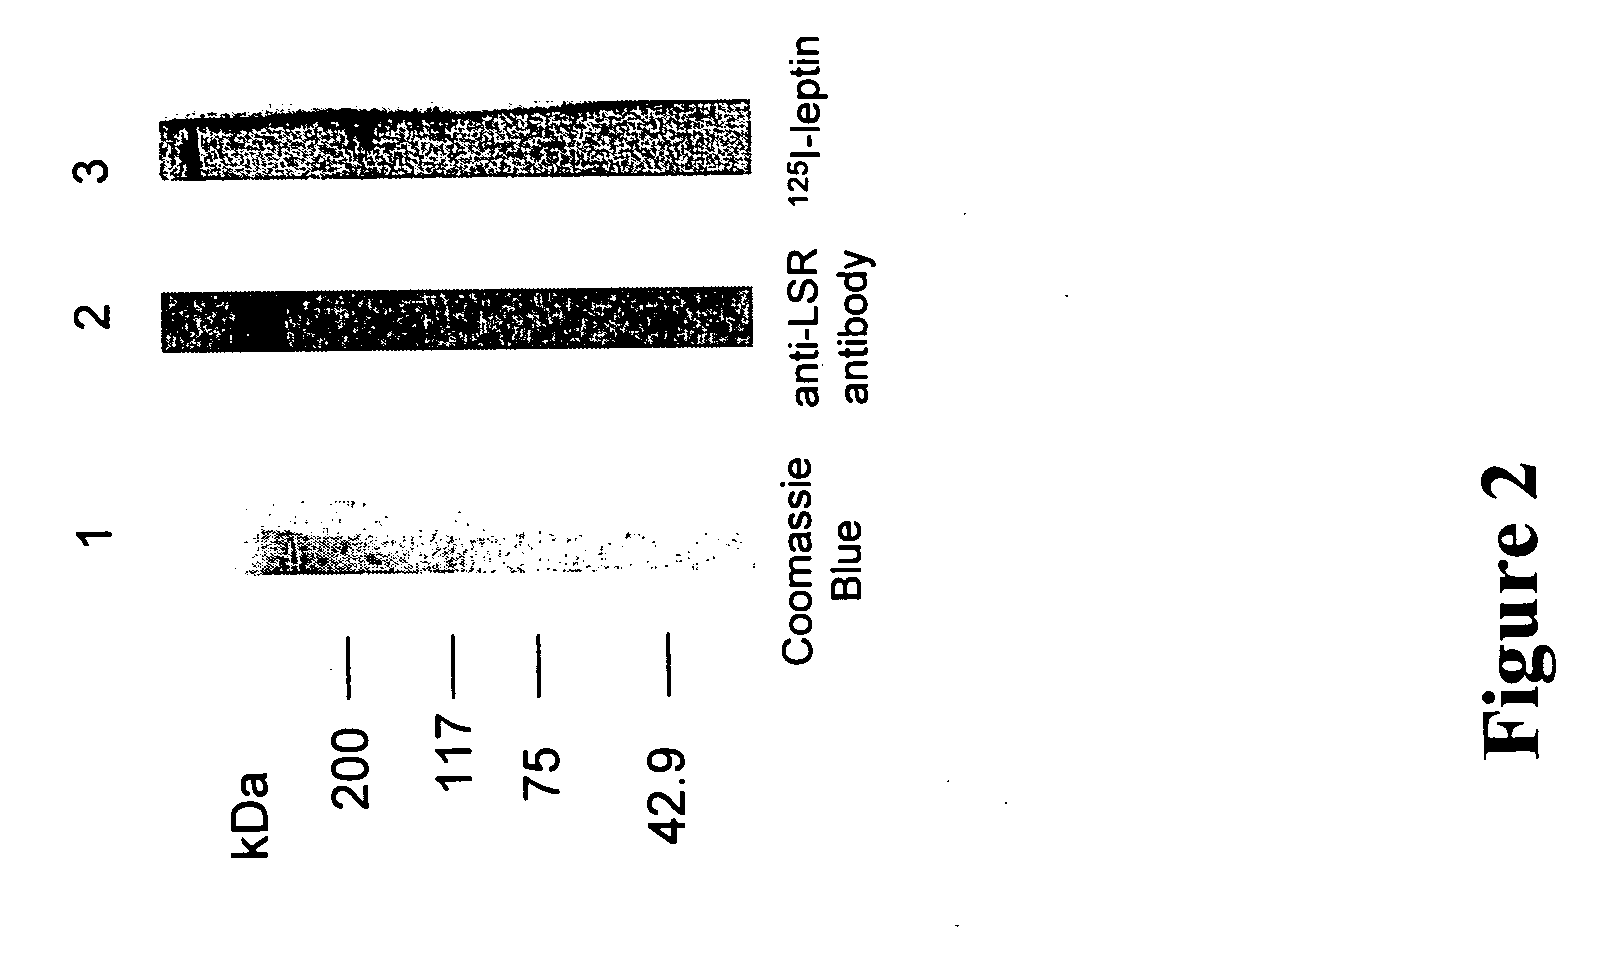 Methods of screening for compounds that modulate the LSR-leptin interaction and their use in the prevention and treatment of obesity-related diseases